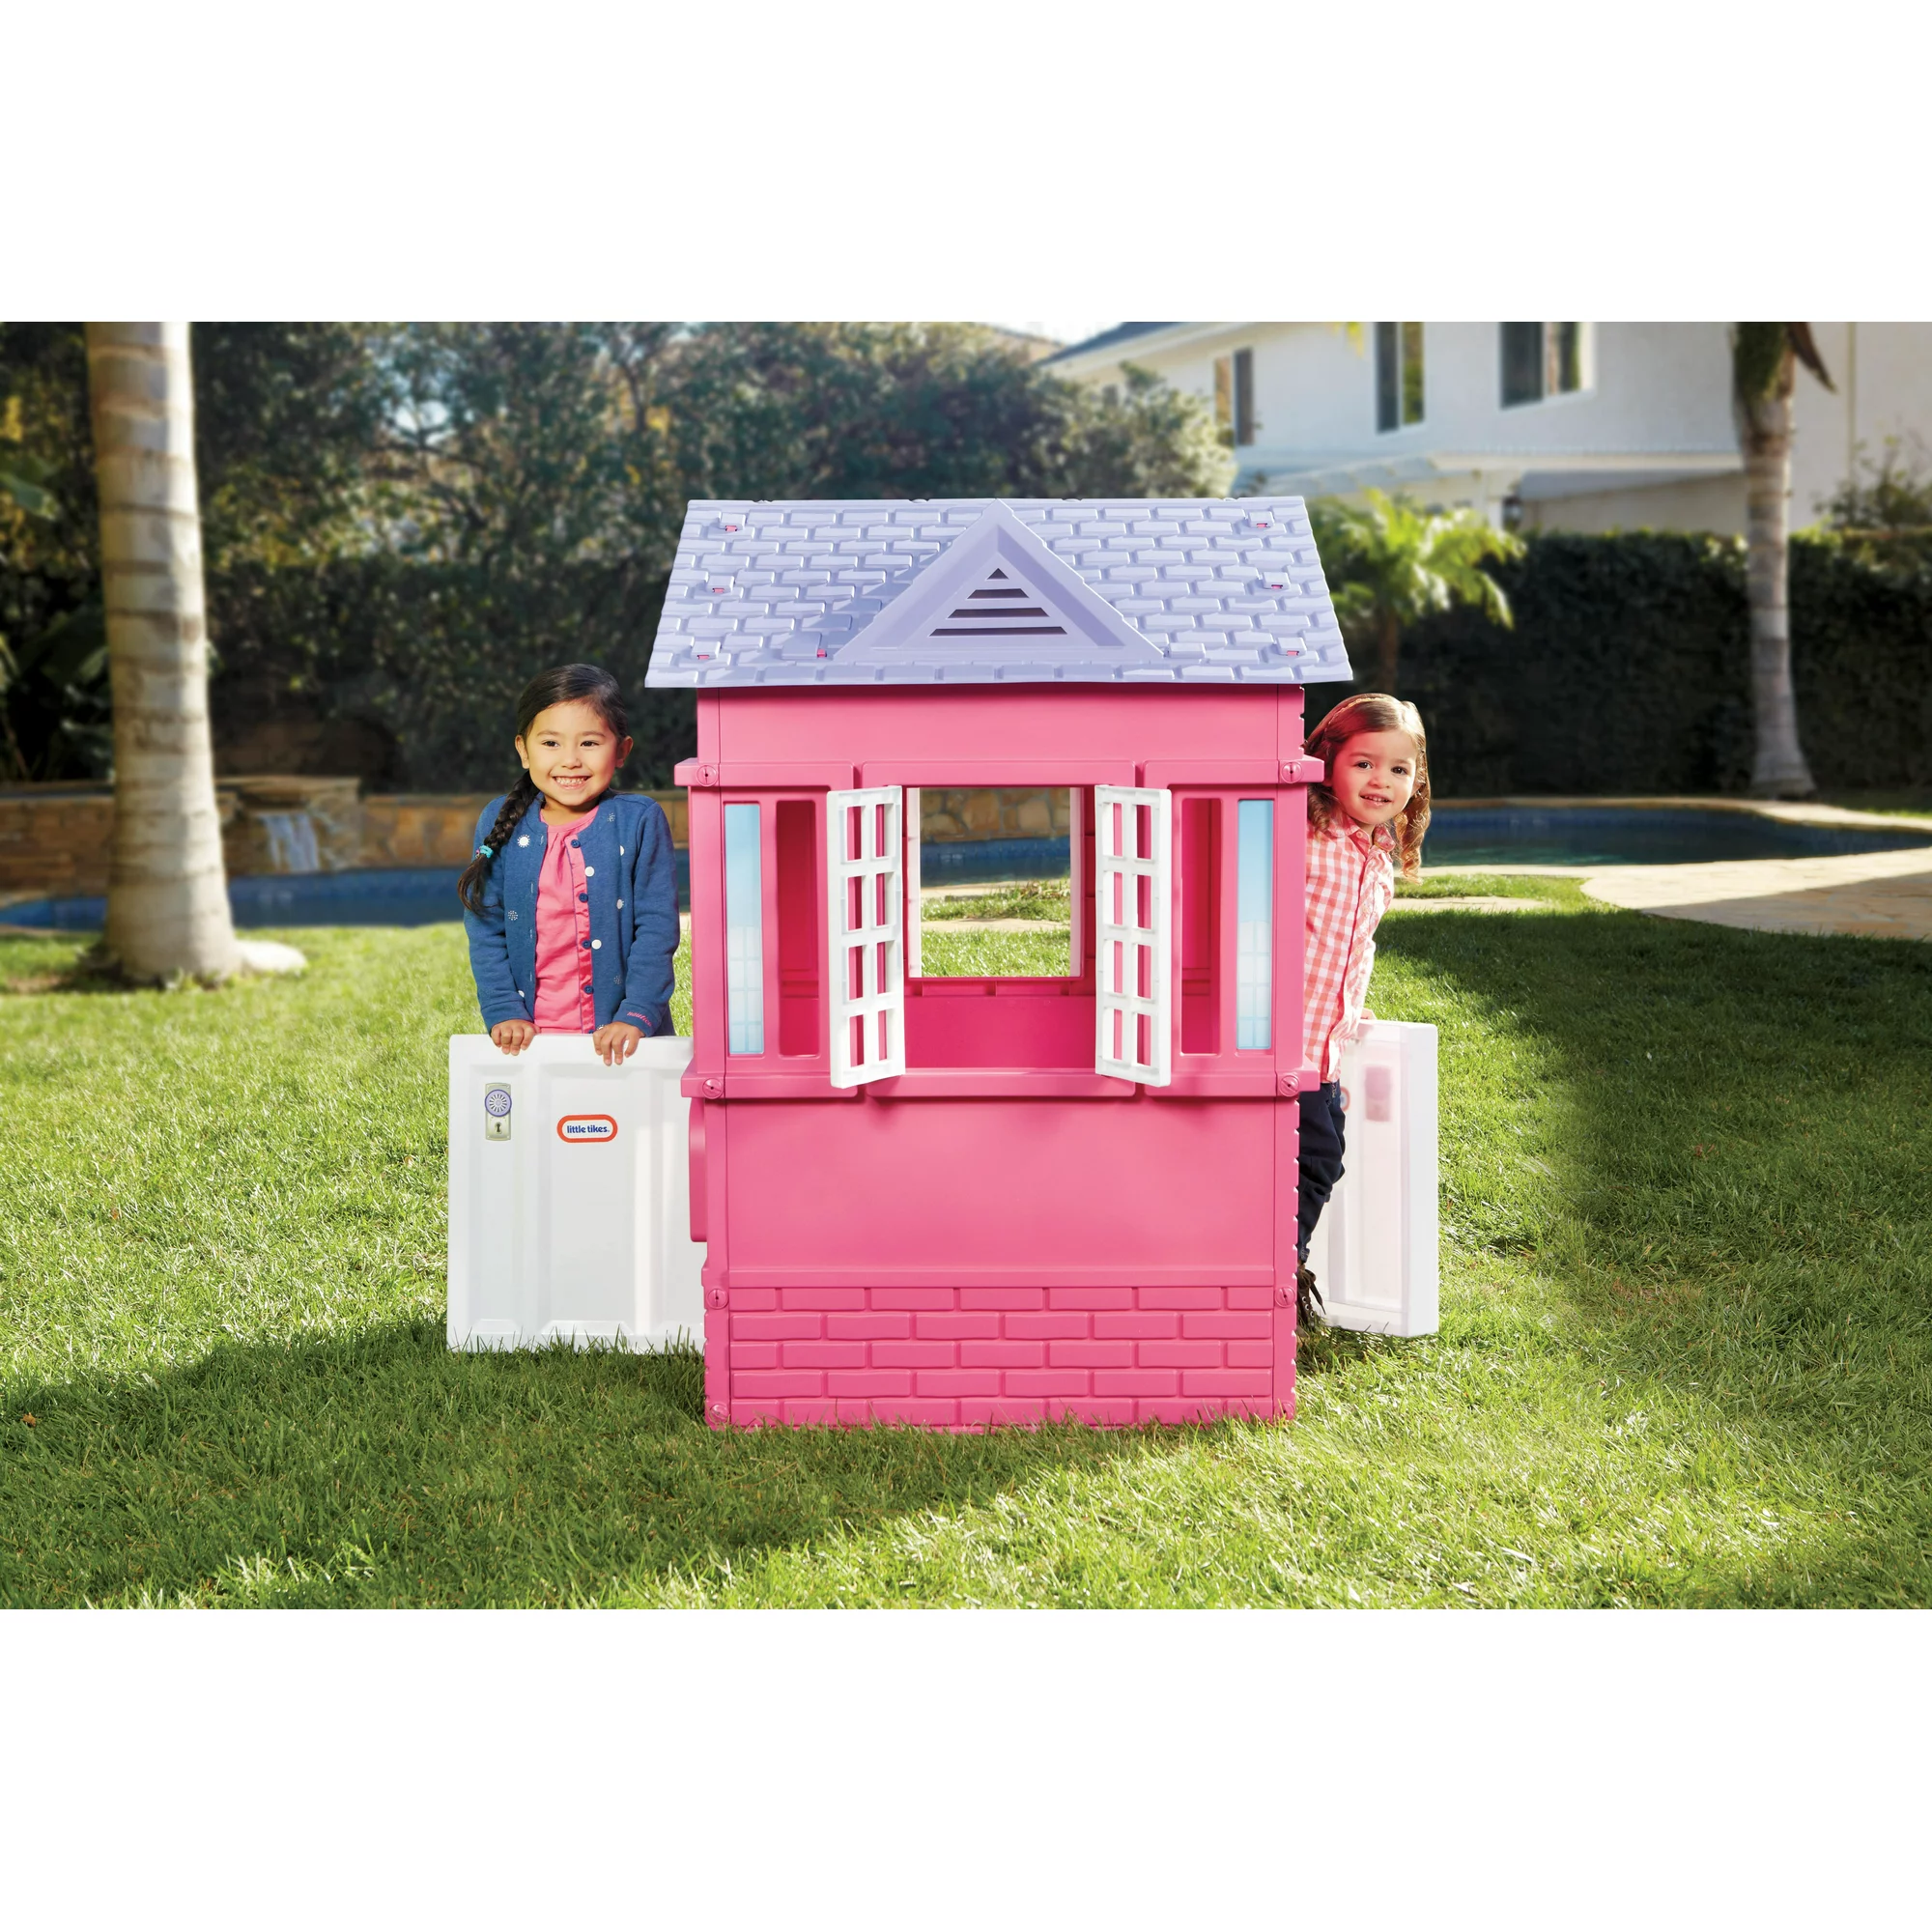 Little Tikes Cape Cottage House, Pink - Pretend Playhouse for Girls Boys  Kids 2-8 Years Old